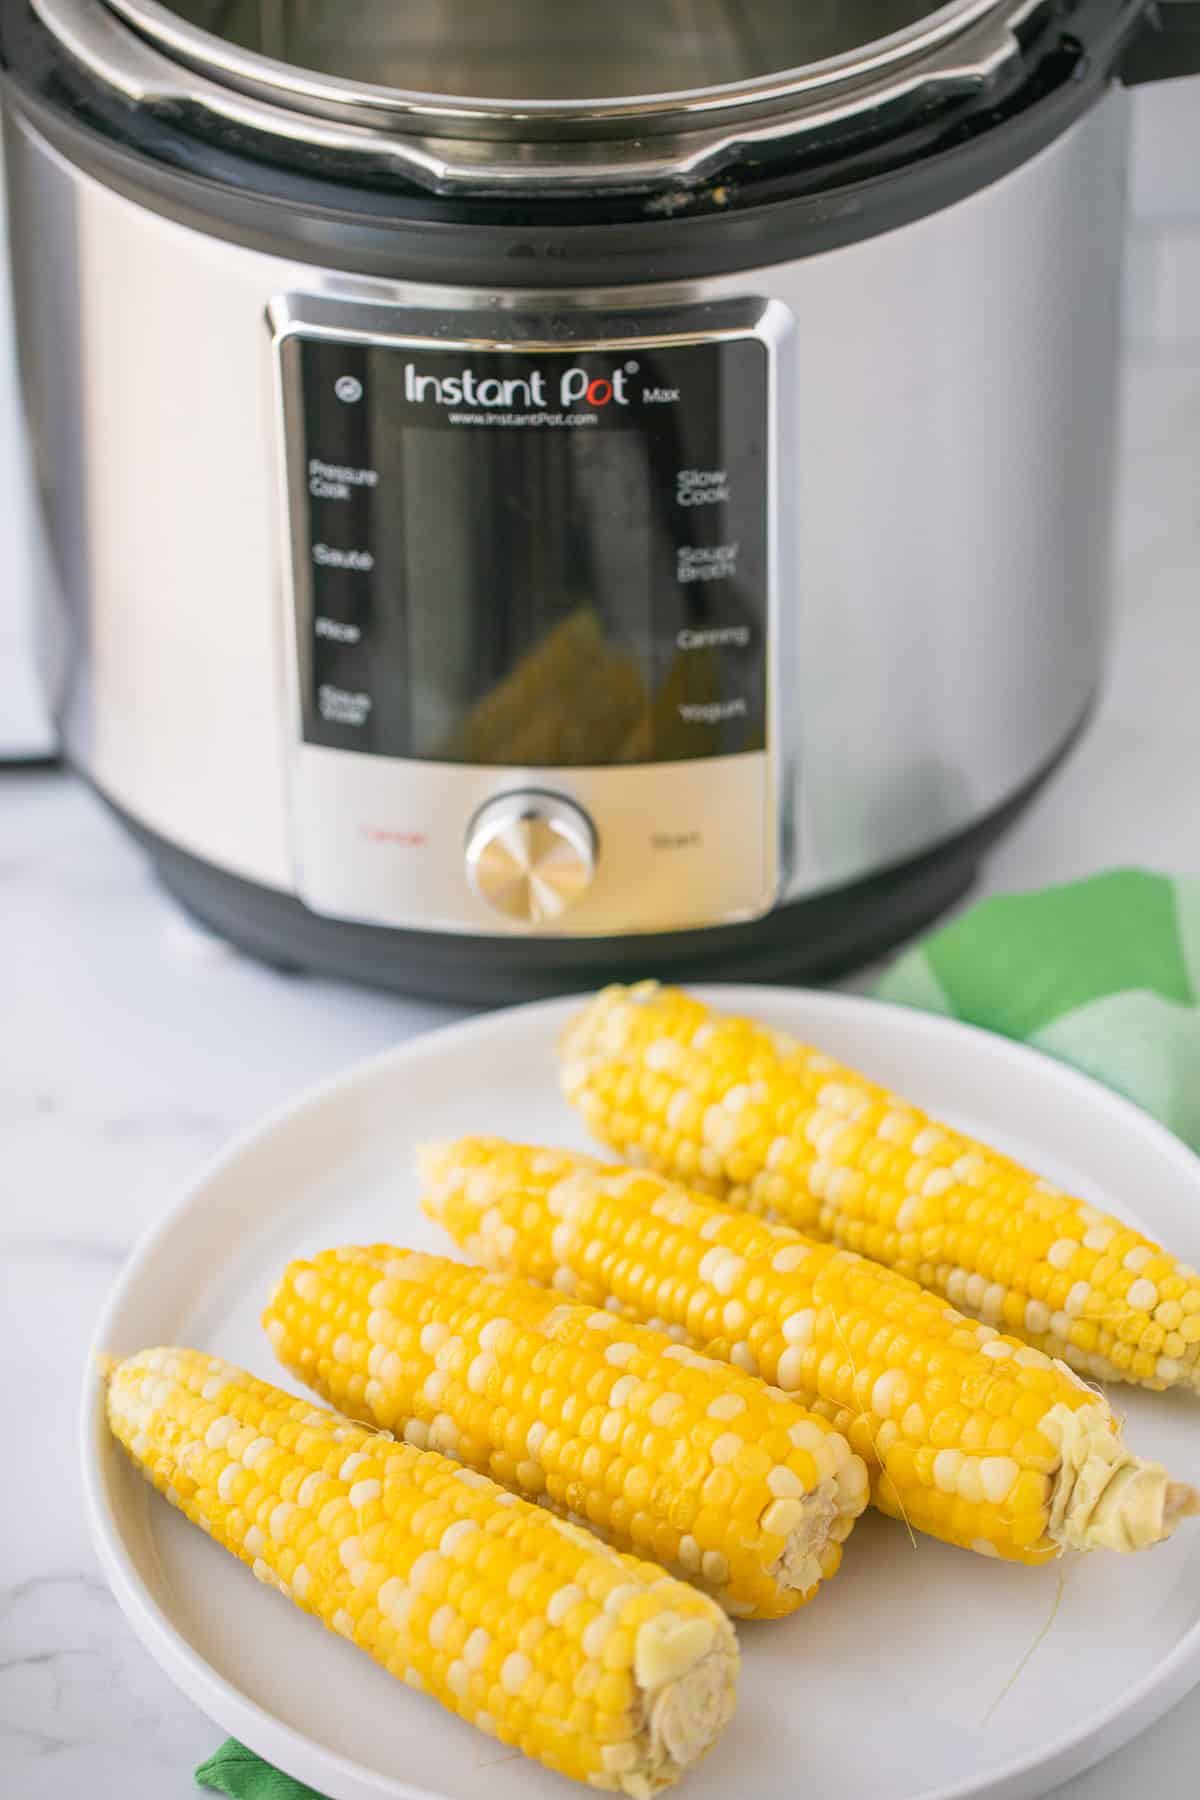 plate of cooked corn on the cob in front of an instant pot pressure cooker.